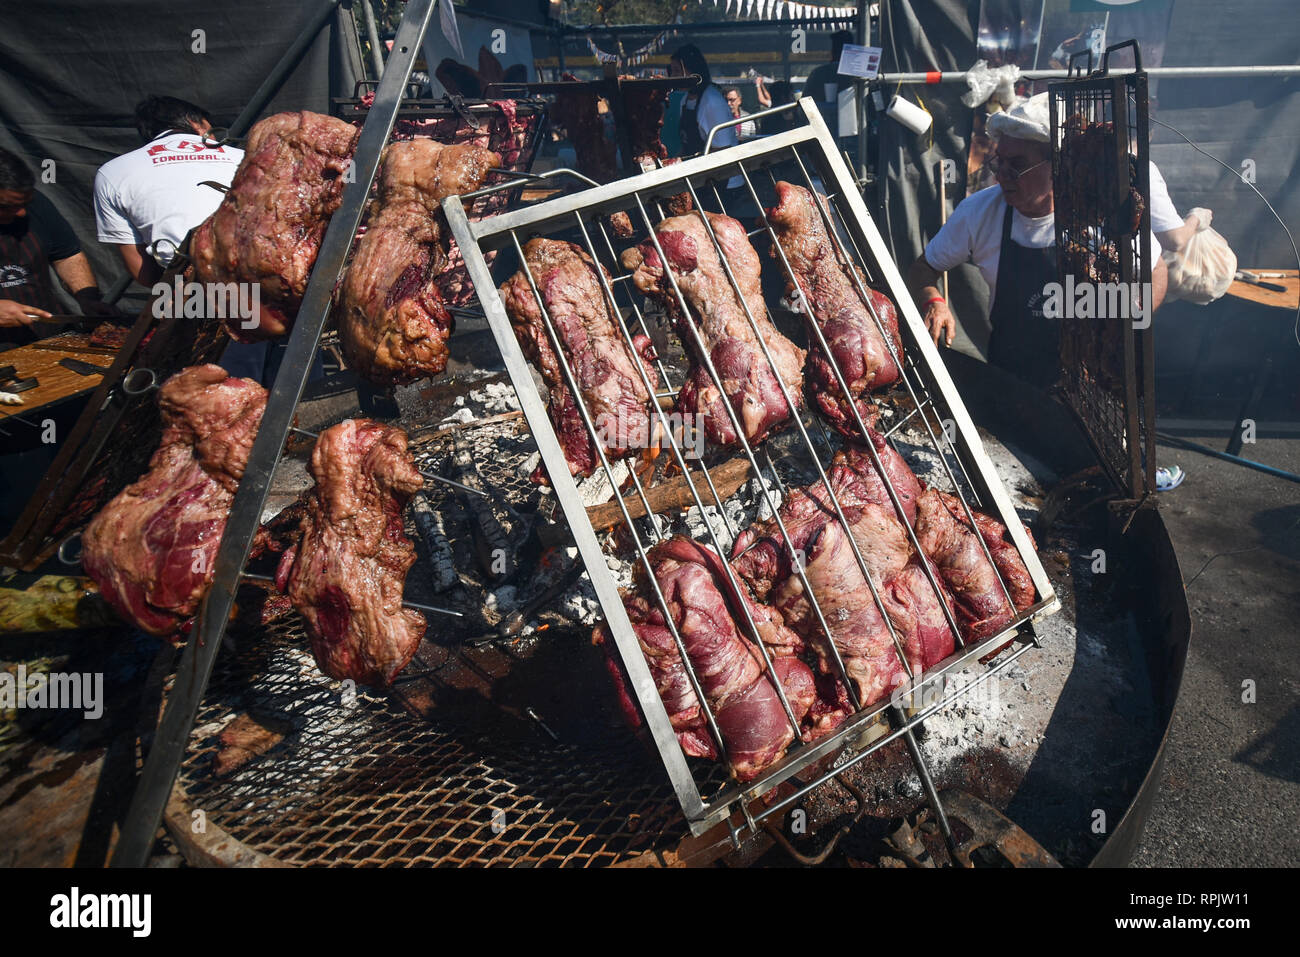 Buenos Aires, Argentina - 20 Aug, 2017: Cooking a traditional South American asado (grill) during the Federal Asado Championship. Stock Photo